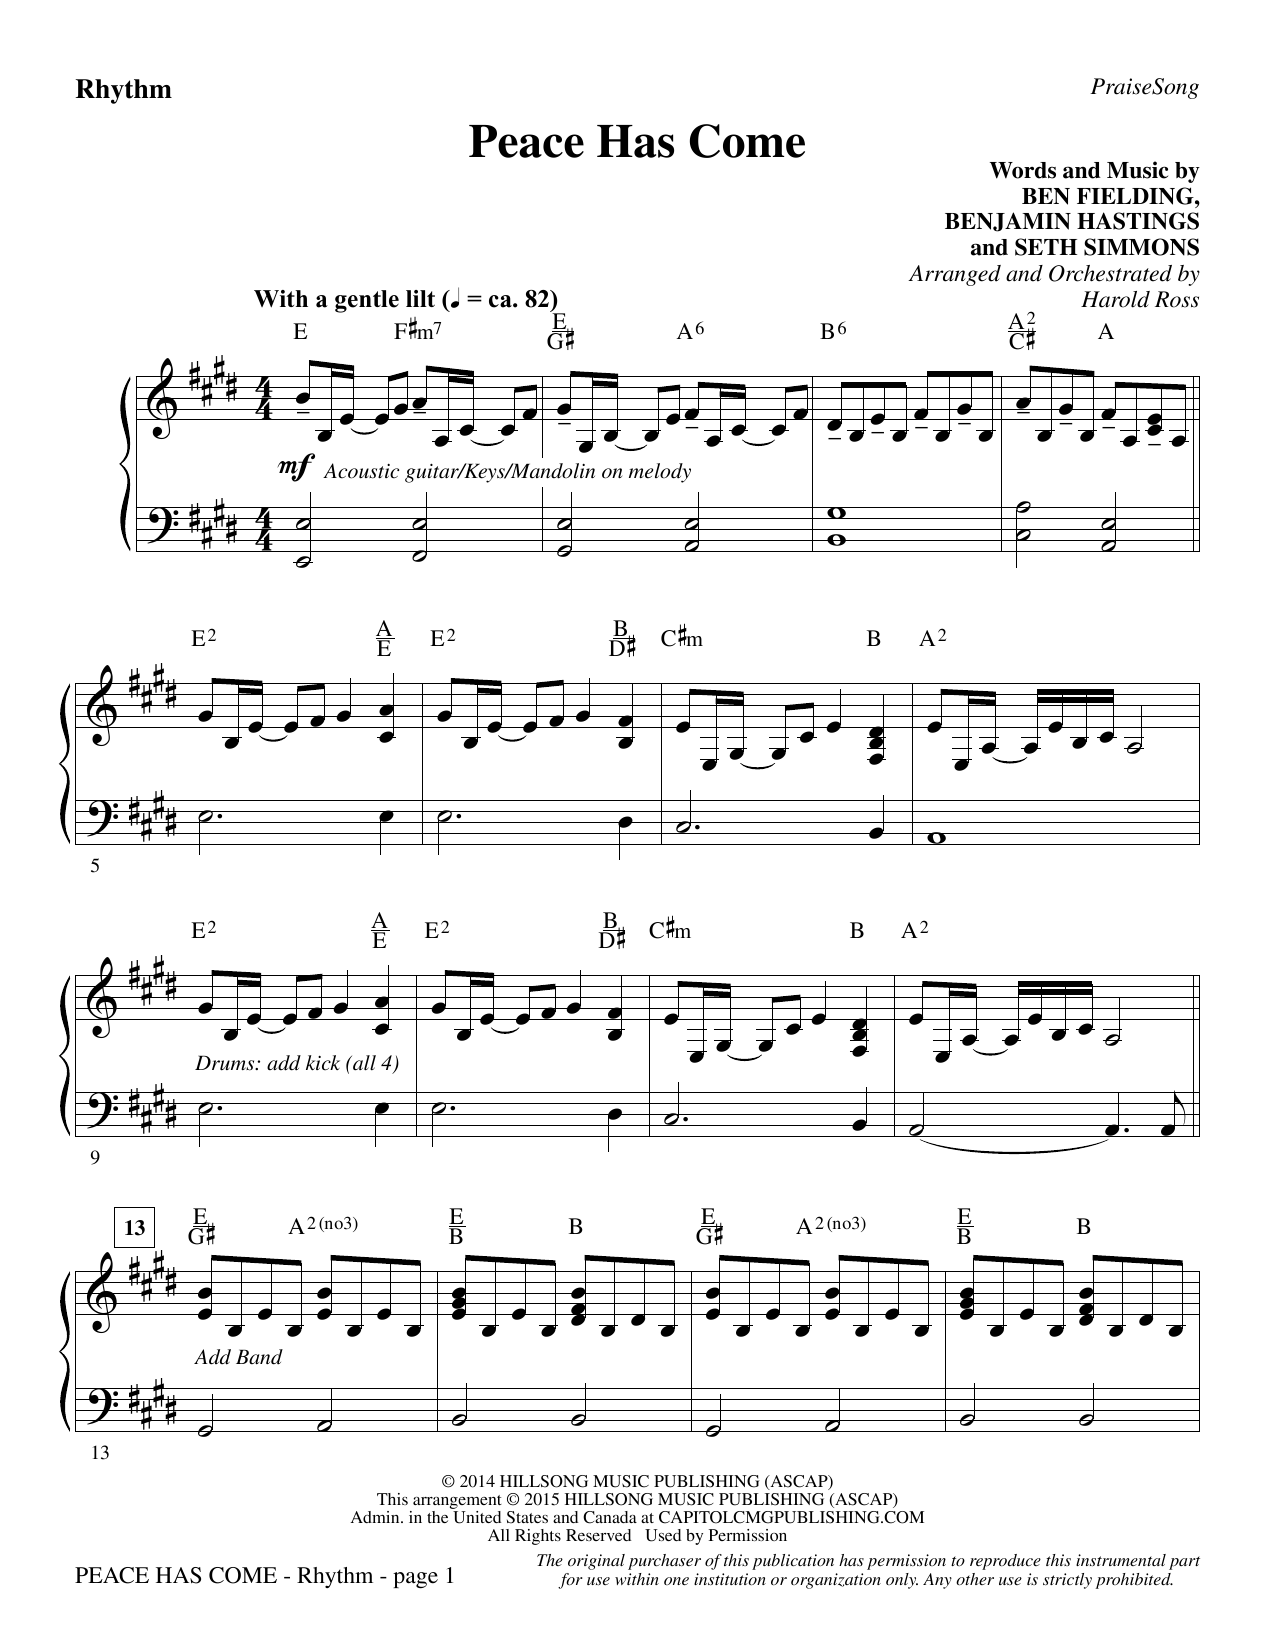 Harold Ross Peace Has Come - Rhythm sheet music notes and chords. Download Printable PDF.